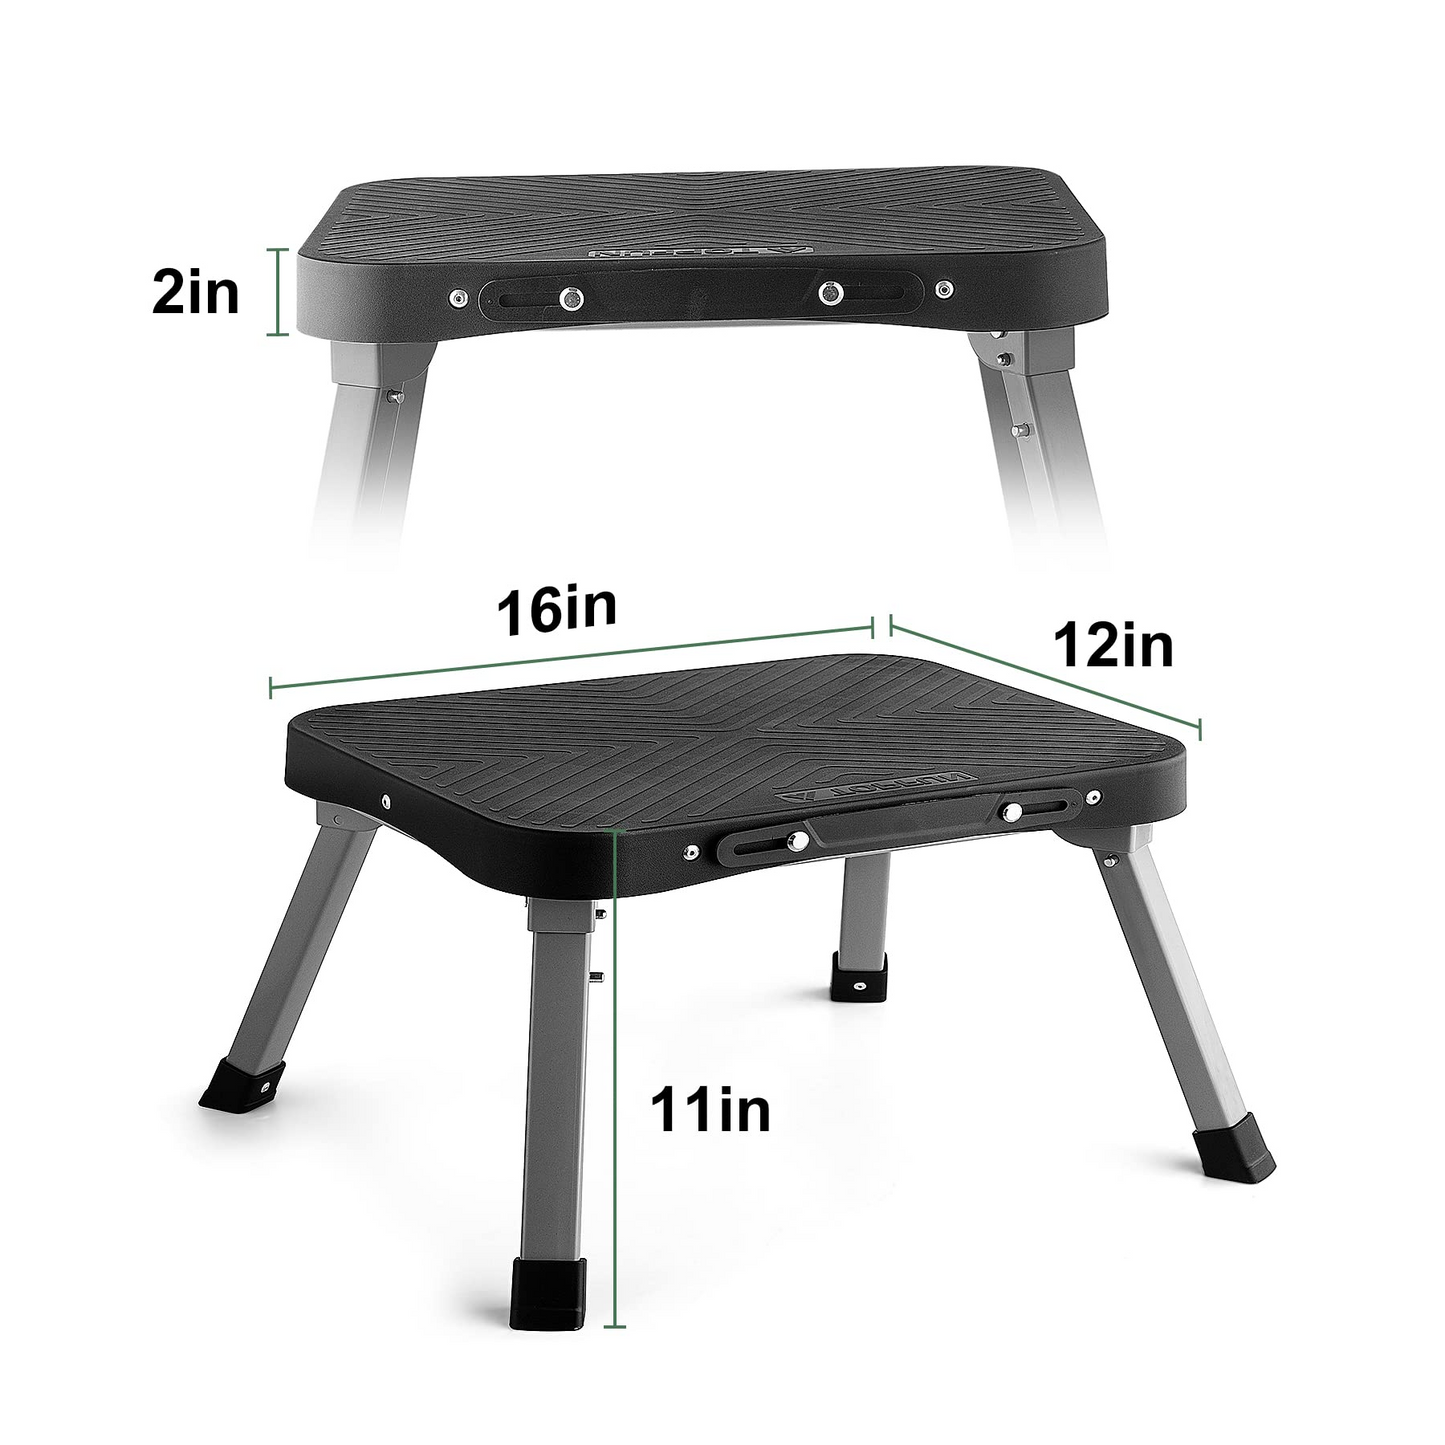 Topfun Step Stool, Hold up to 350lbs, 16x12in Large Platform Sturdy Folding Step Stools, 1-Step Steel Ladder, Portable Non-Slip Step Stools for Kids Adults Seniors at Indoor Outdoor (11 inch, Grey)